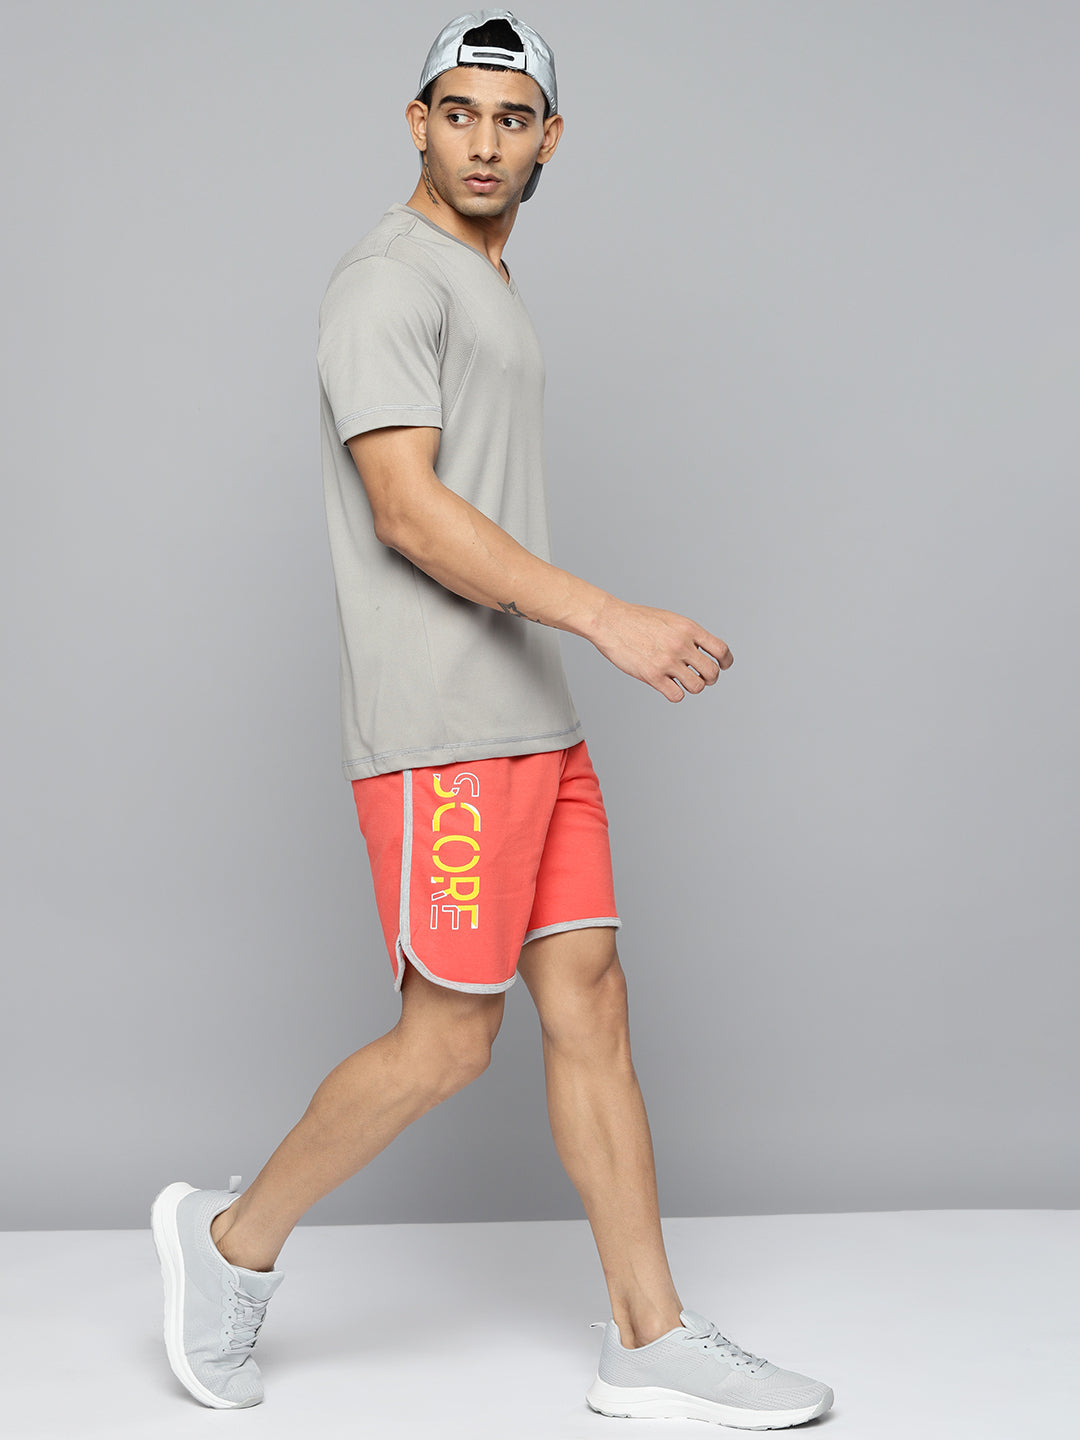 Alcis Men Peach-Coloured Typography Printed Running Shorts